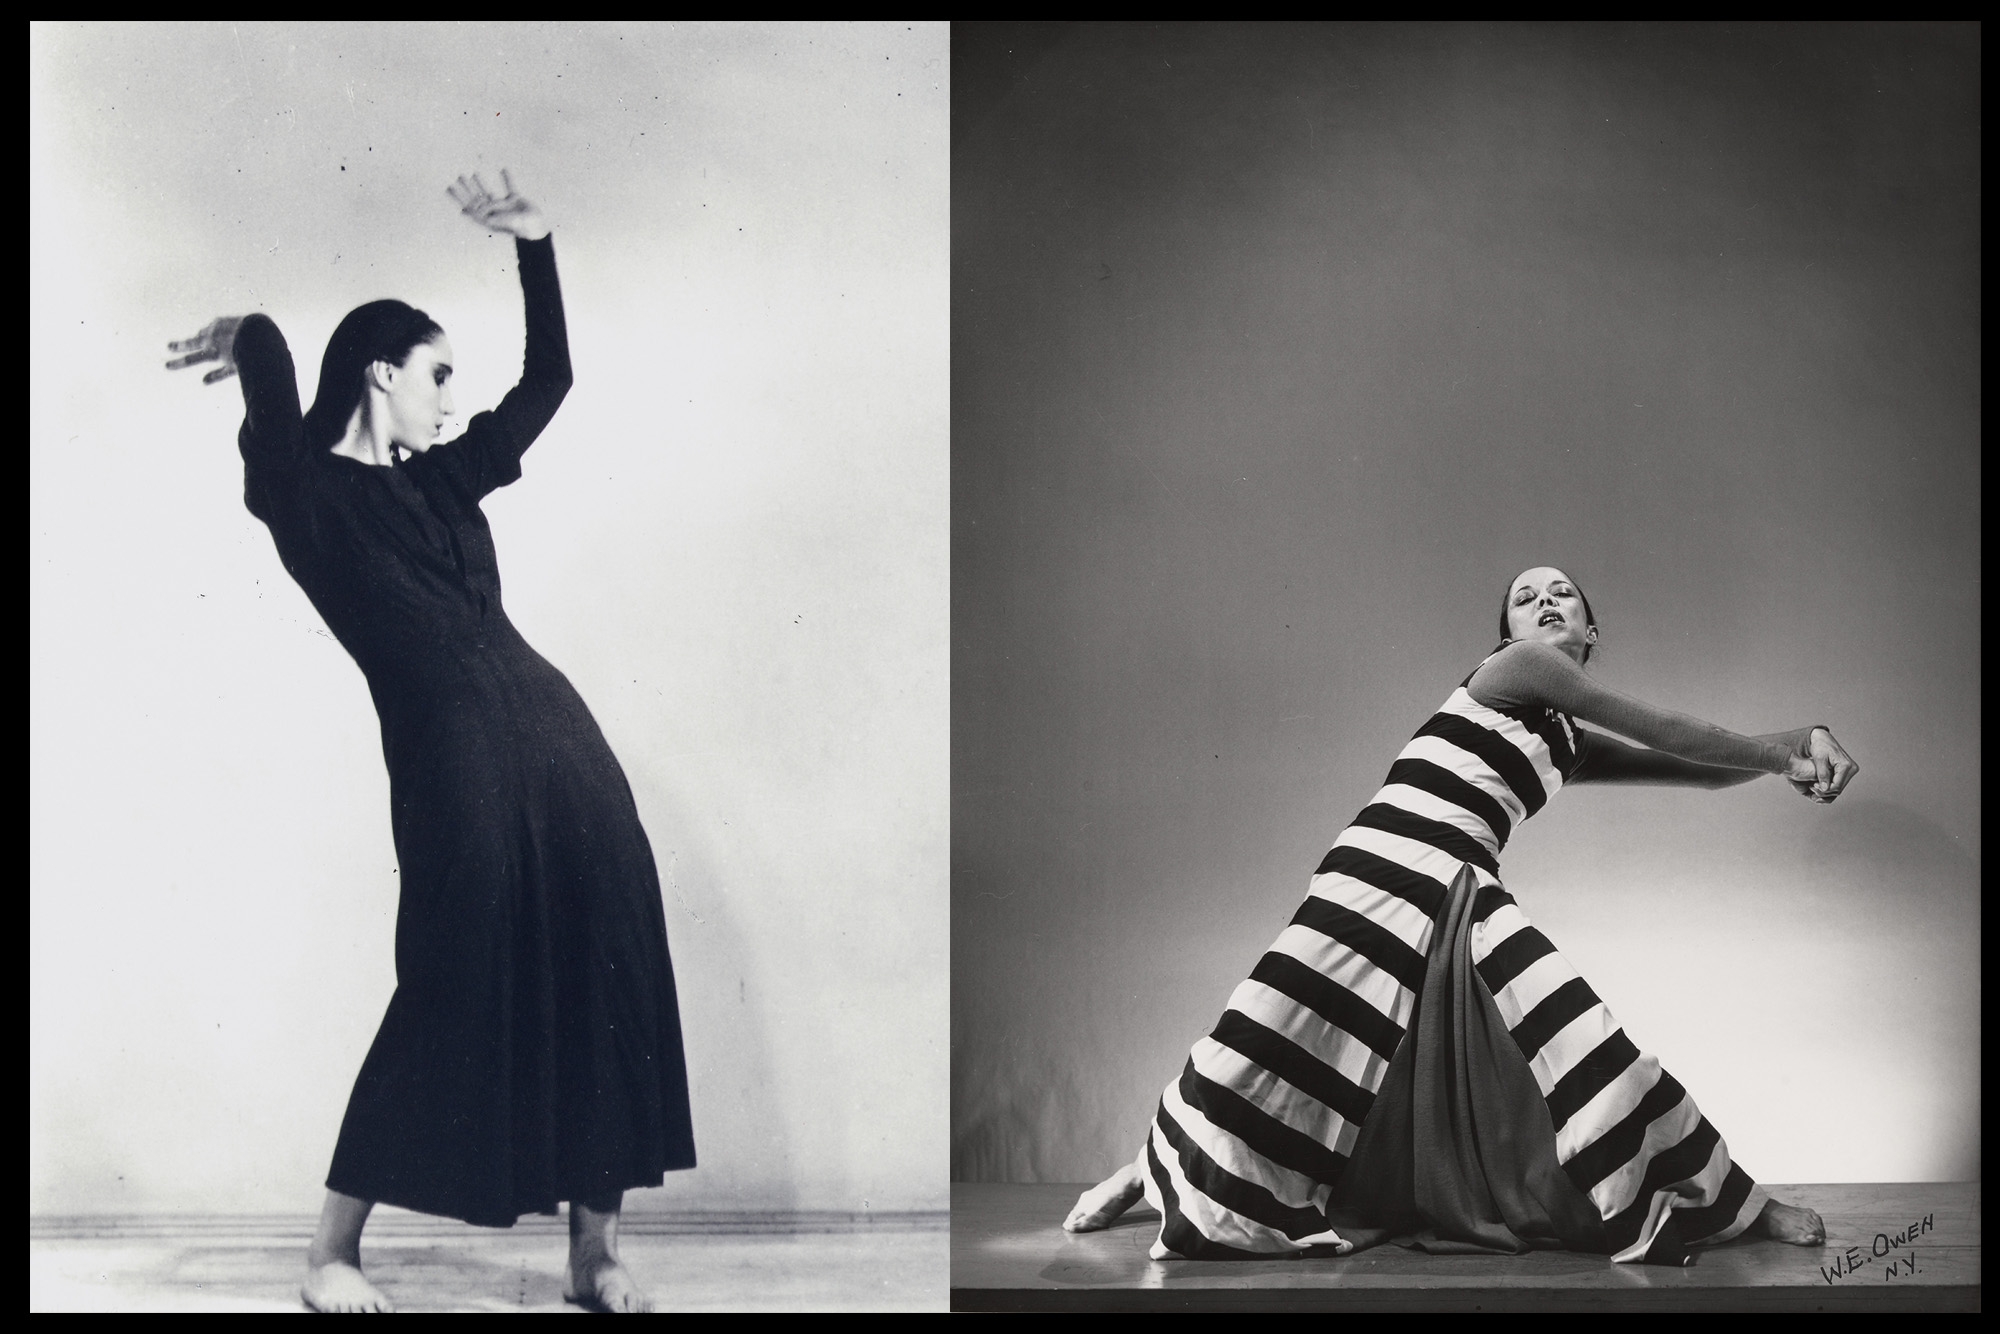 two photos. left of woman in long black dress with one arm stretched up. right is woman in black and white striped dress swinging arms with hands gripped